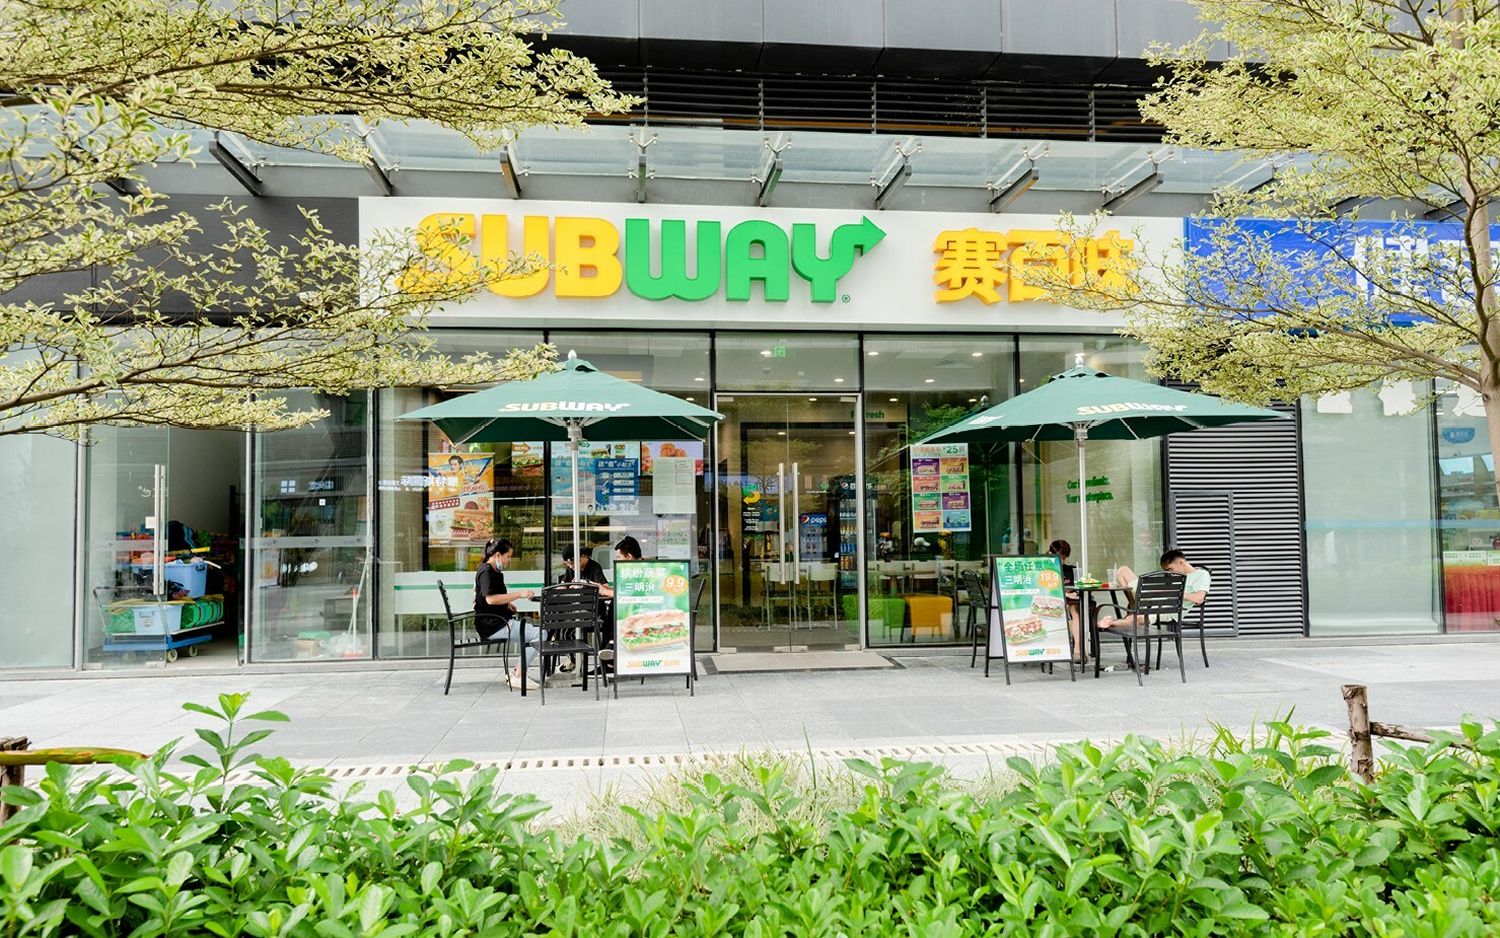 Subway Announces Largest Master Franchise Agreement in Brand History to Expand Presence in Mainland China